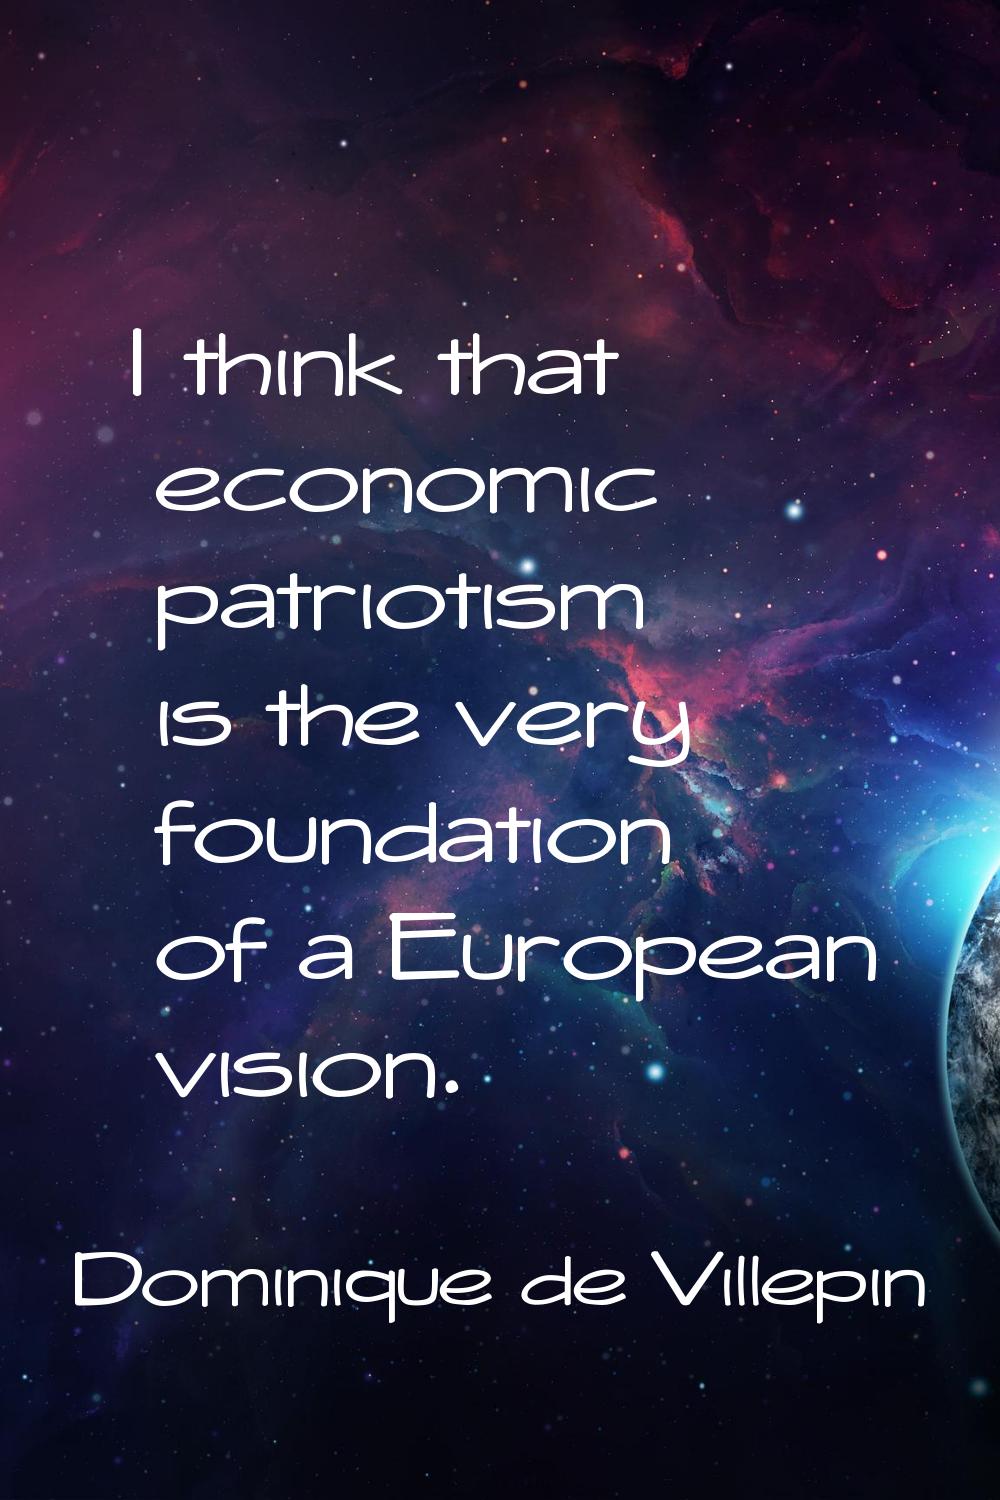 I think that economic patriotism is the very foundation of a European vision.